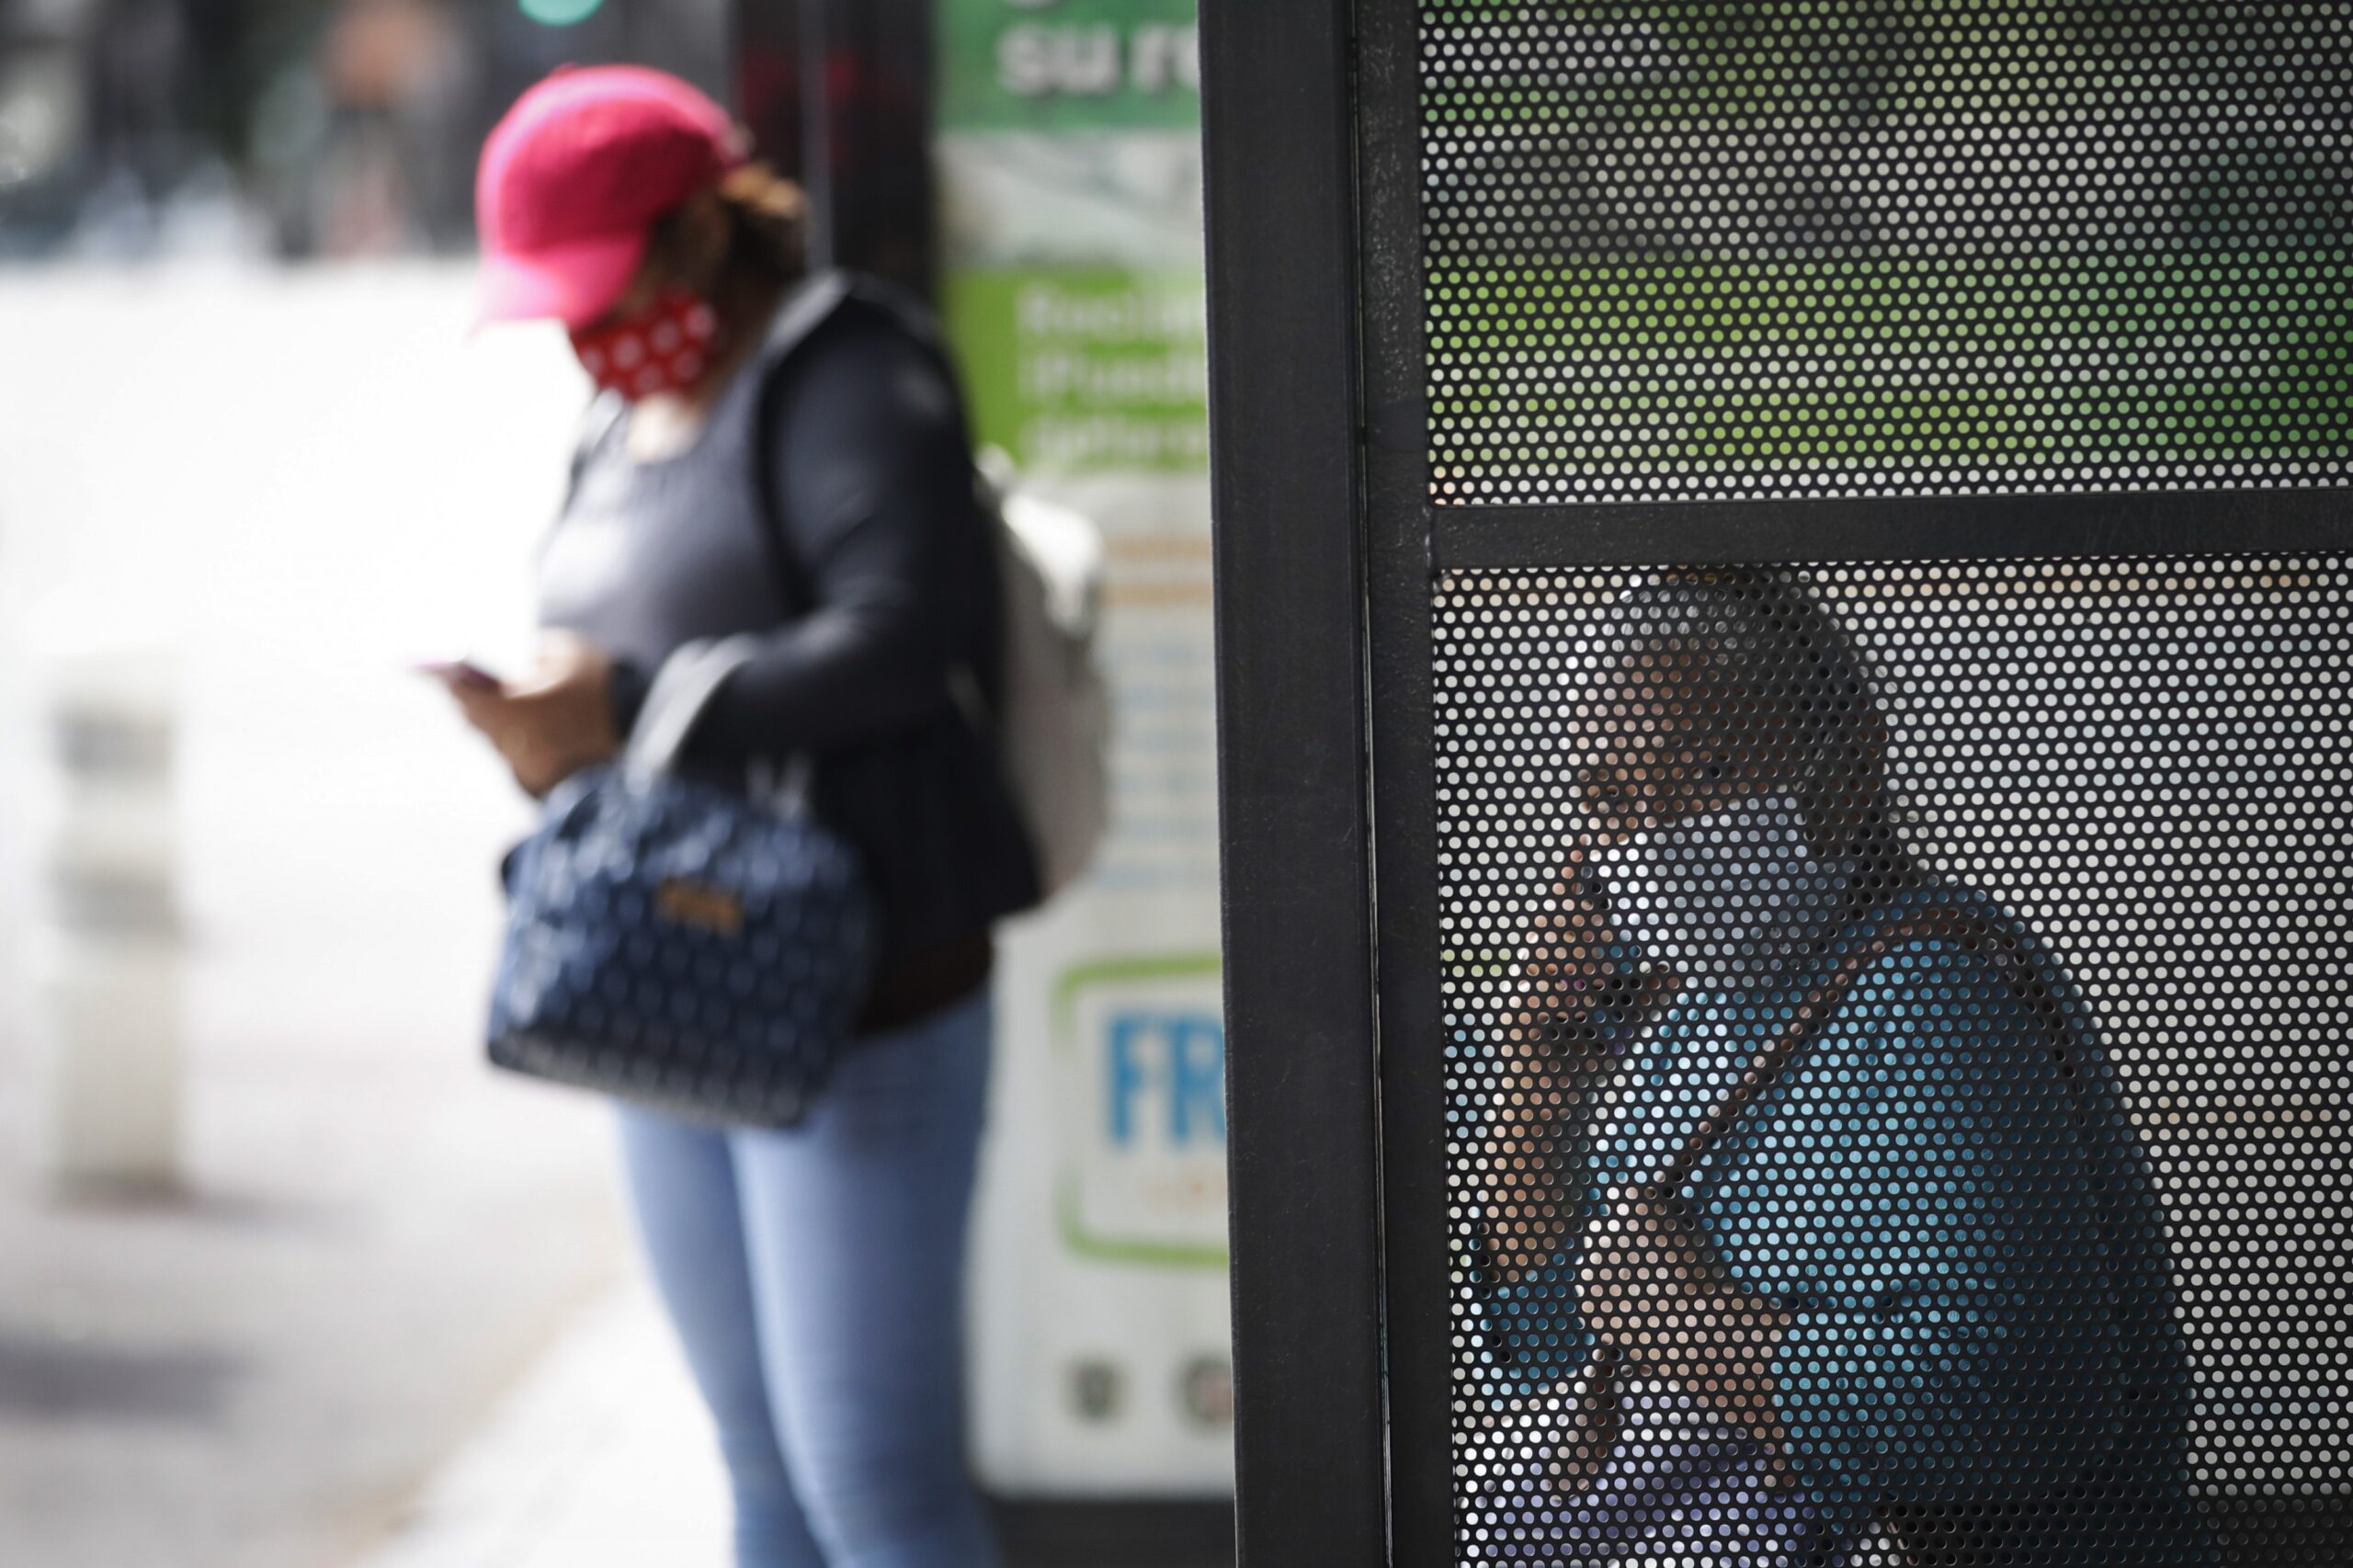 Two women wait at a bus stop amid the coronavirus pandemic